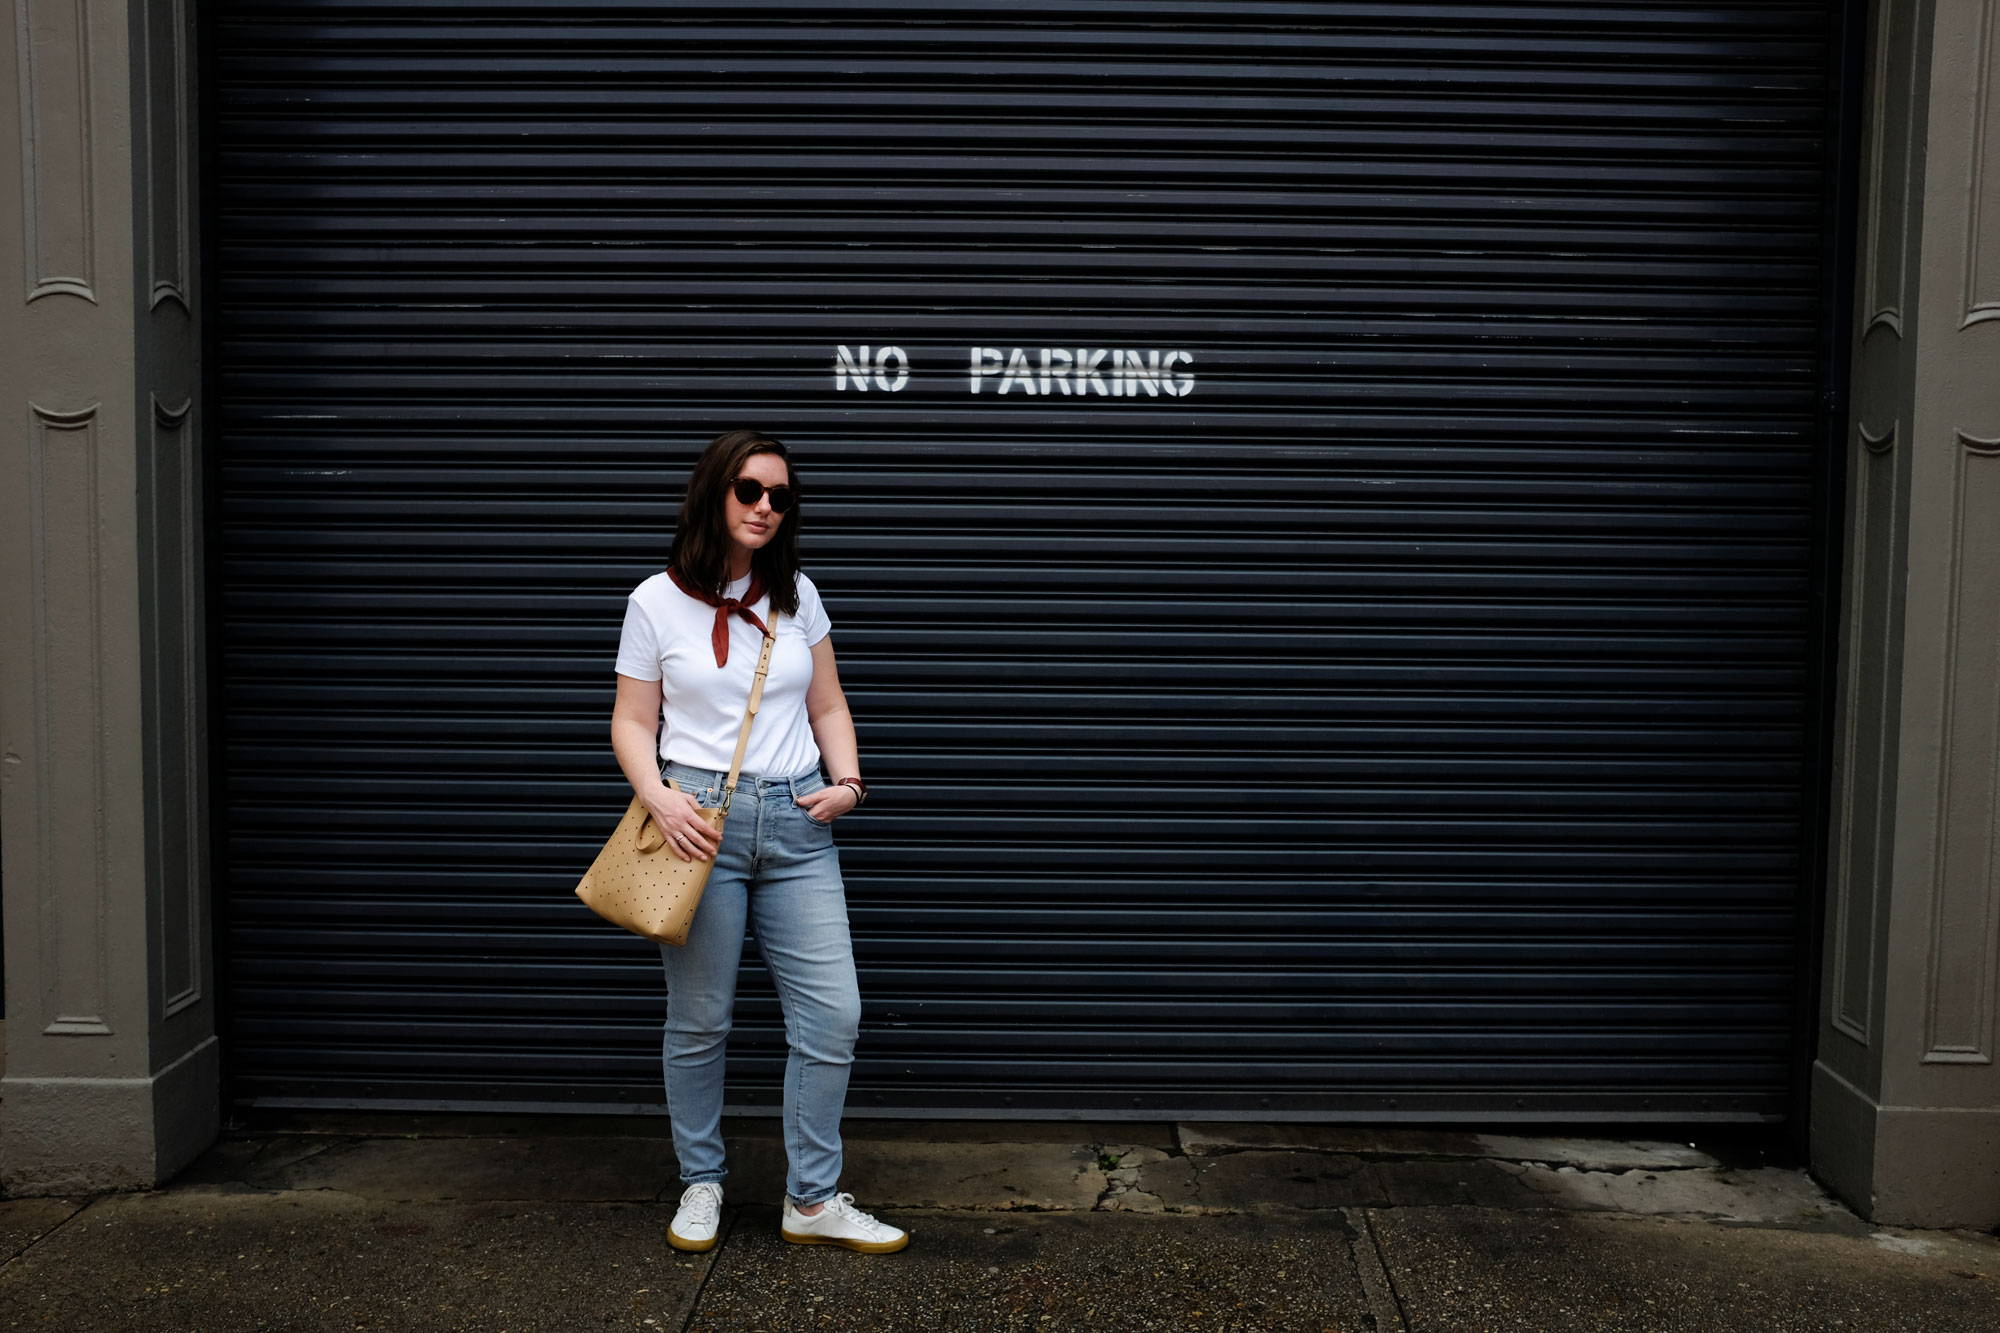 Alyssa standing in front of a sign that says No Parking